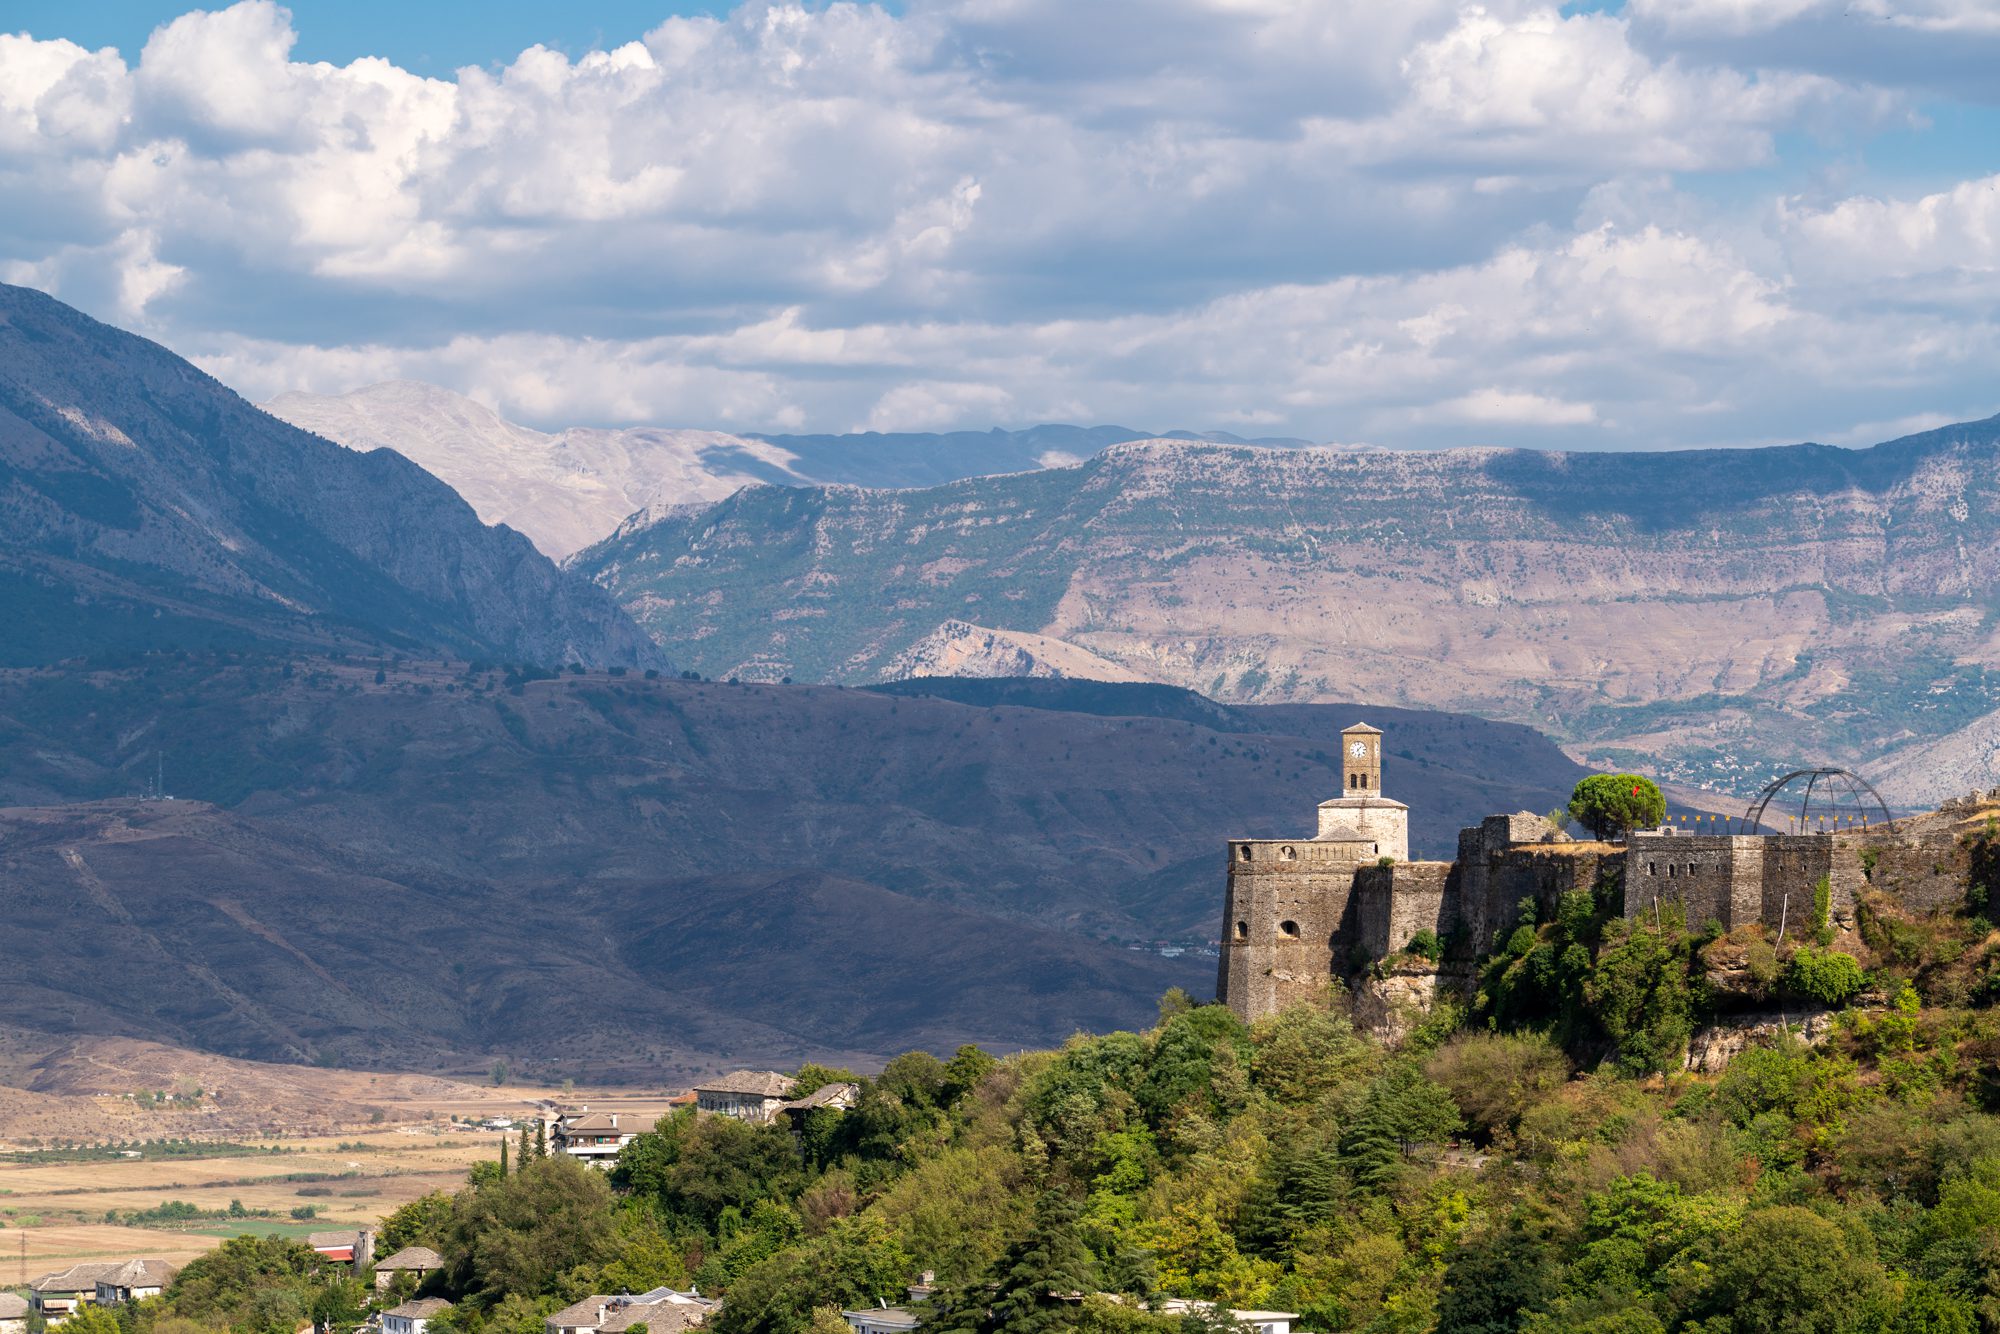 An ancient fortress with a prominent tower sits atop a hill, overlooking a valley with sprawling fields, backed by towering, cloud-dappled mountains.